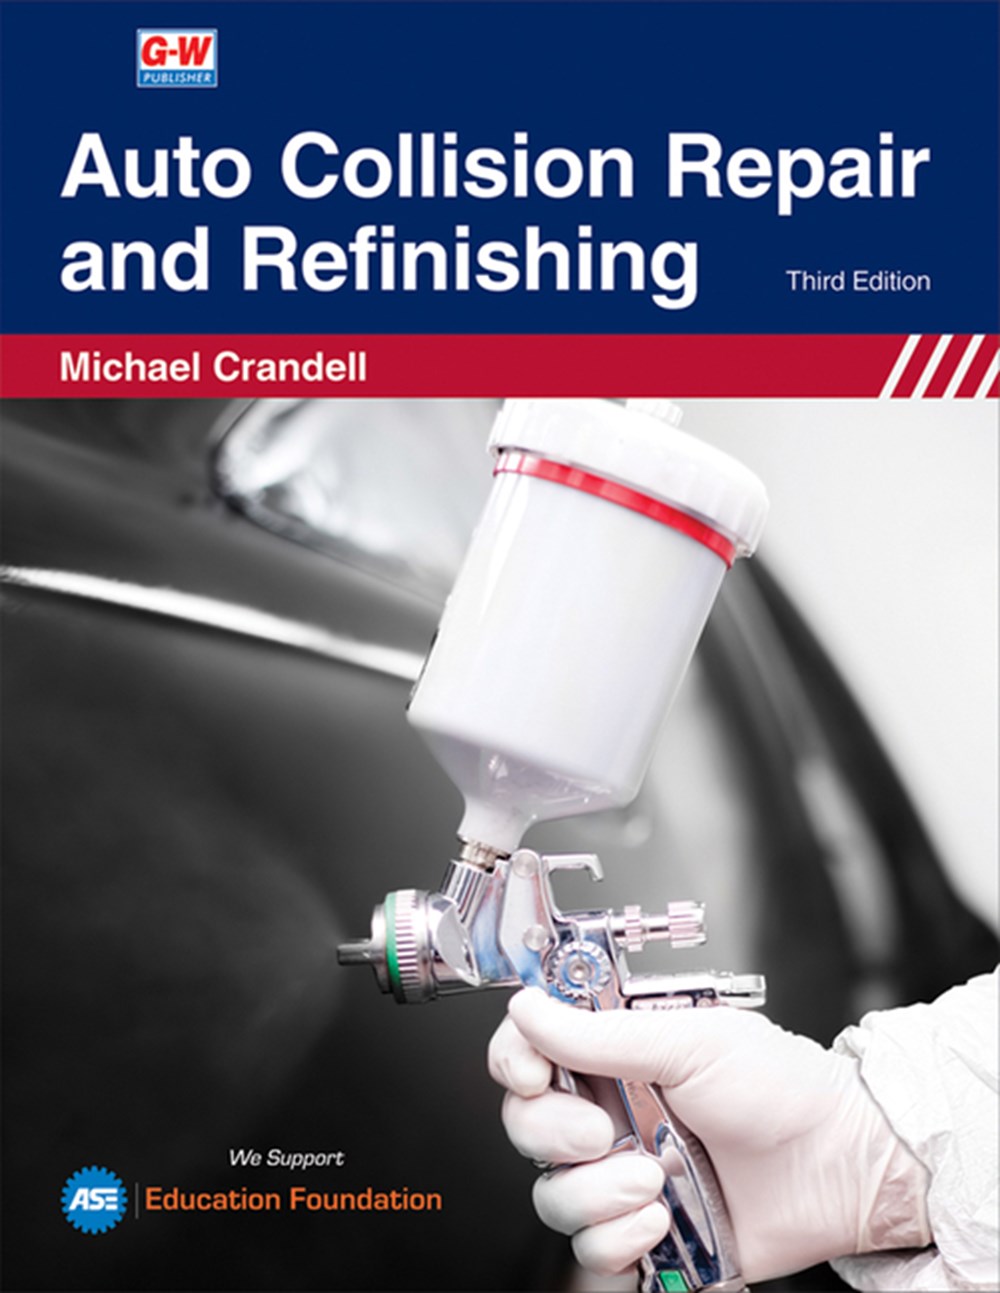 Auto Collision Repair and Refinishing (Third Edition, Revised, Textbook)